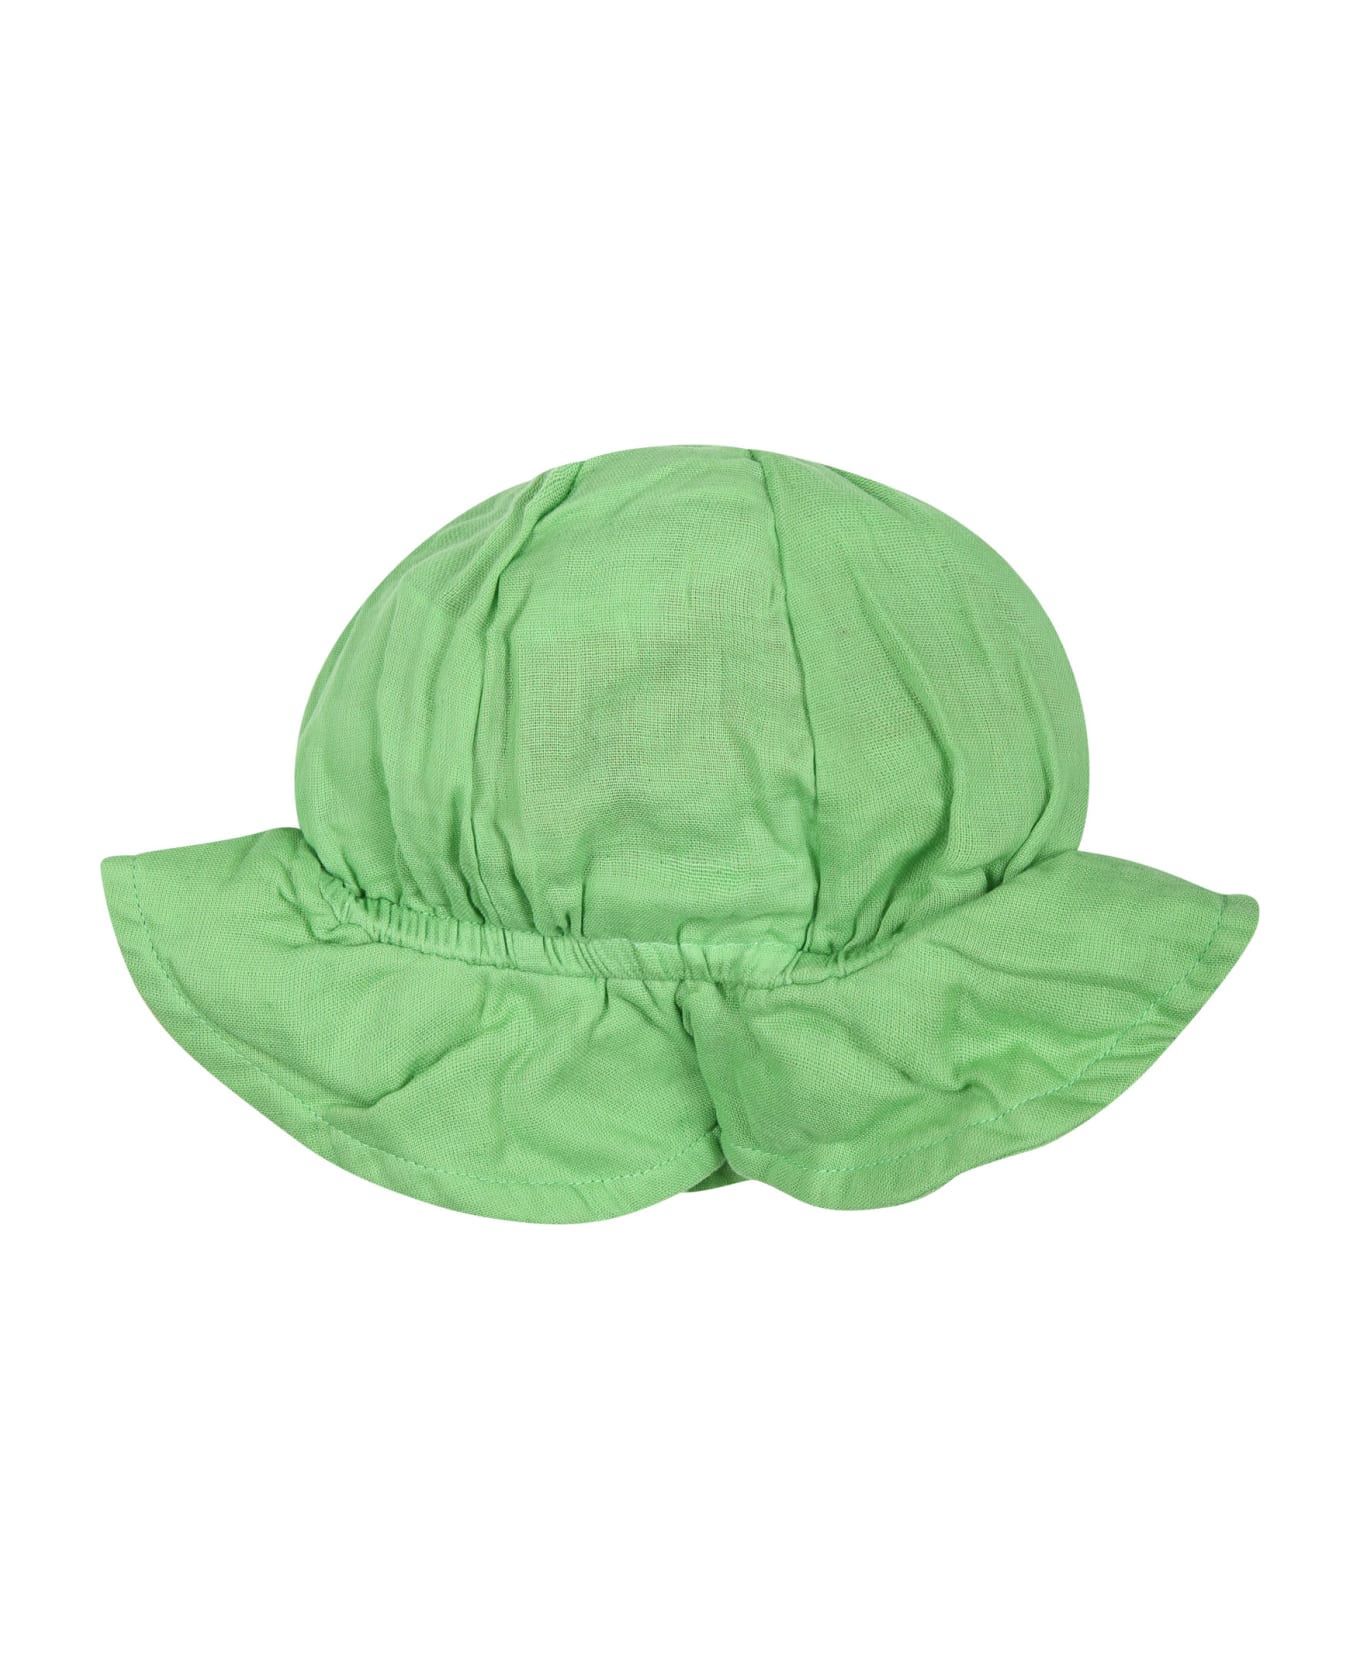 Molo Green Cloche For Bébé Kids With Smile - Green